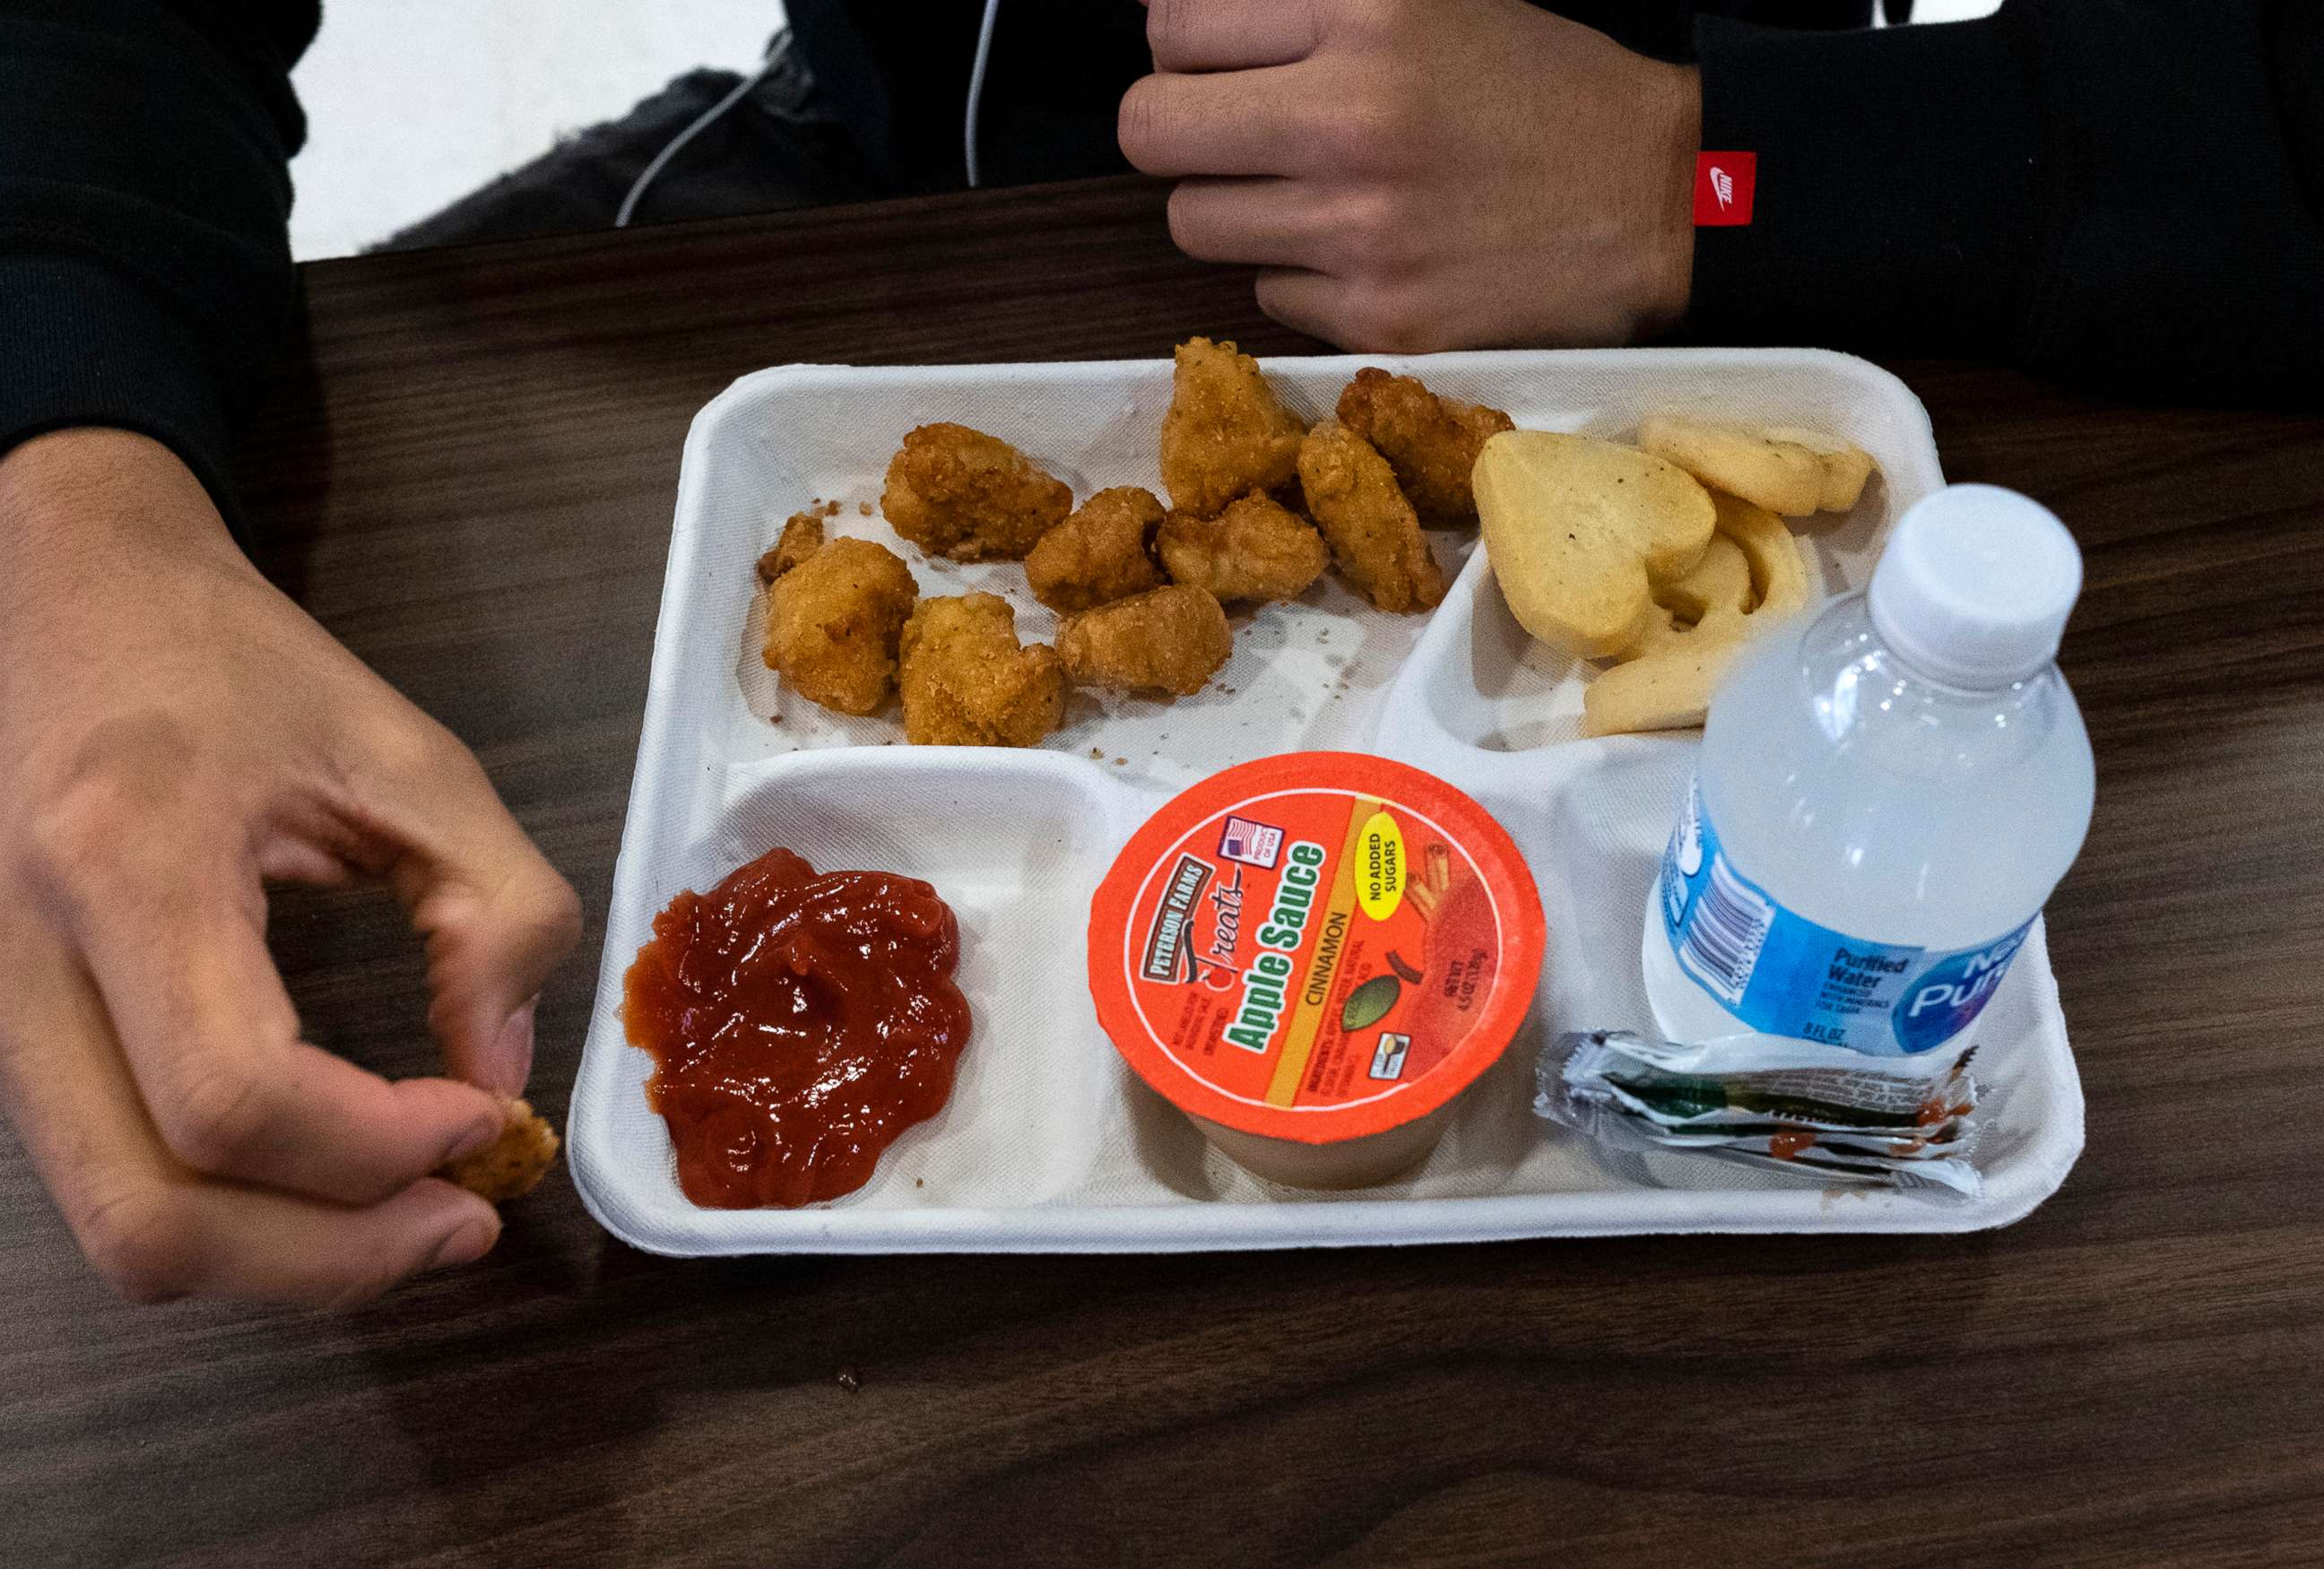 PHOTO: A school lunch tray in Oxon Hill, Md., Oct. 26, 2018.